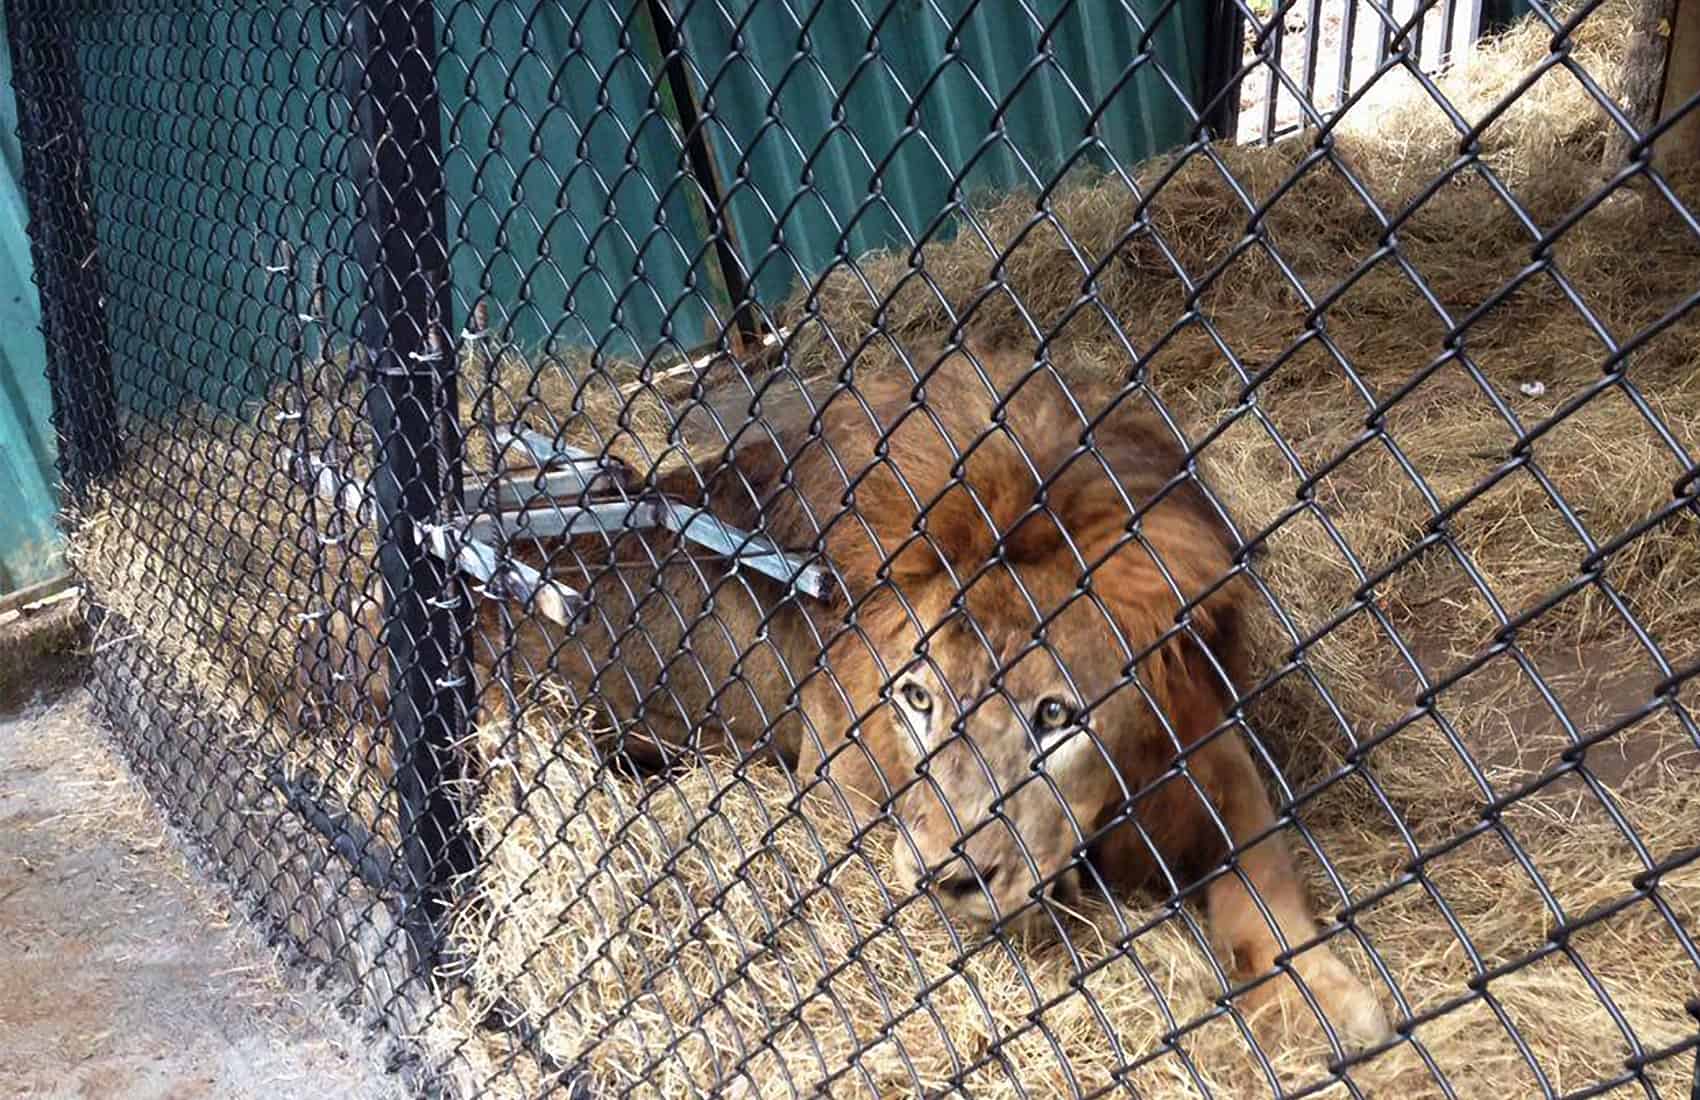 Kivú the lion at Zoo Ave Dec. 06 2016.